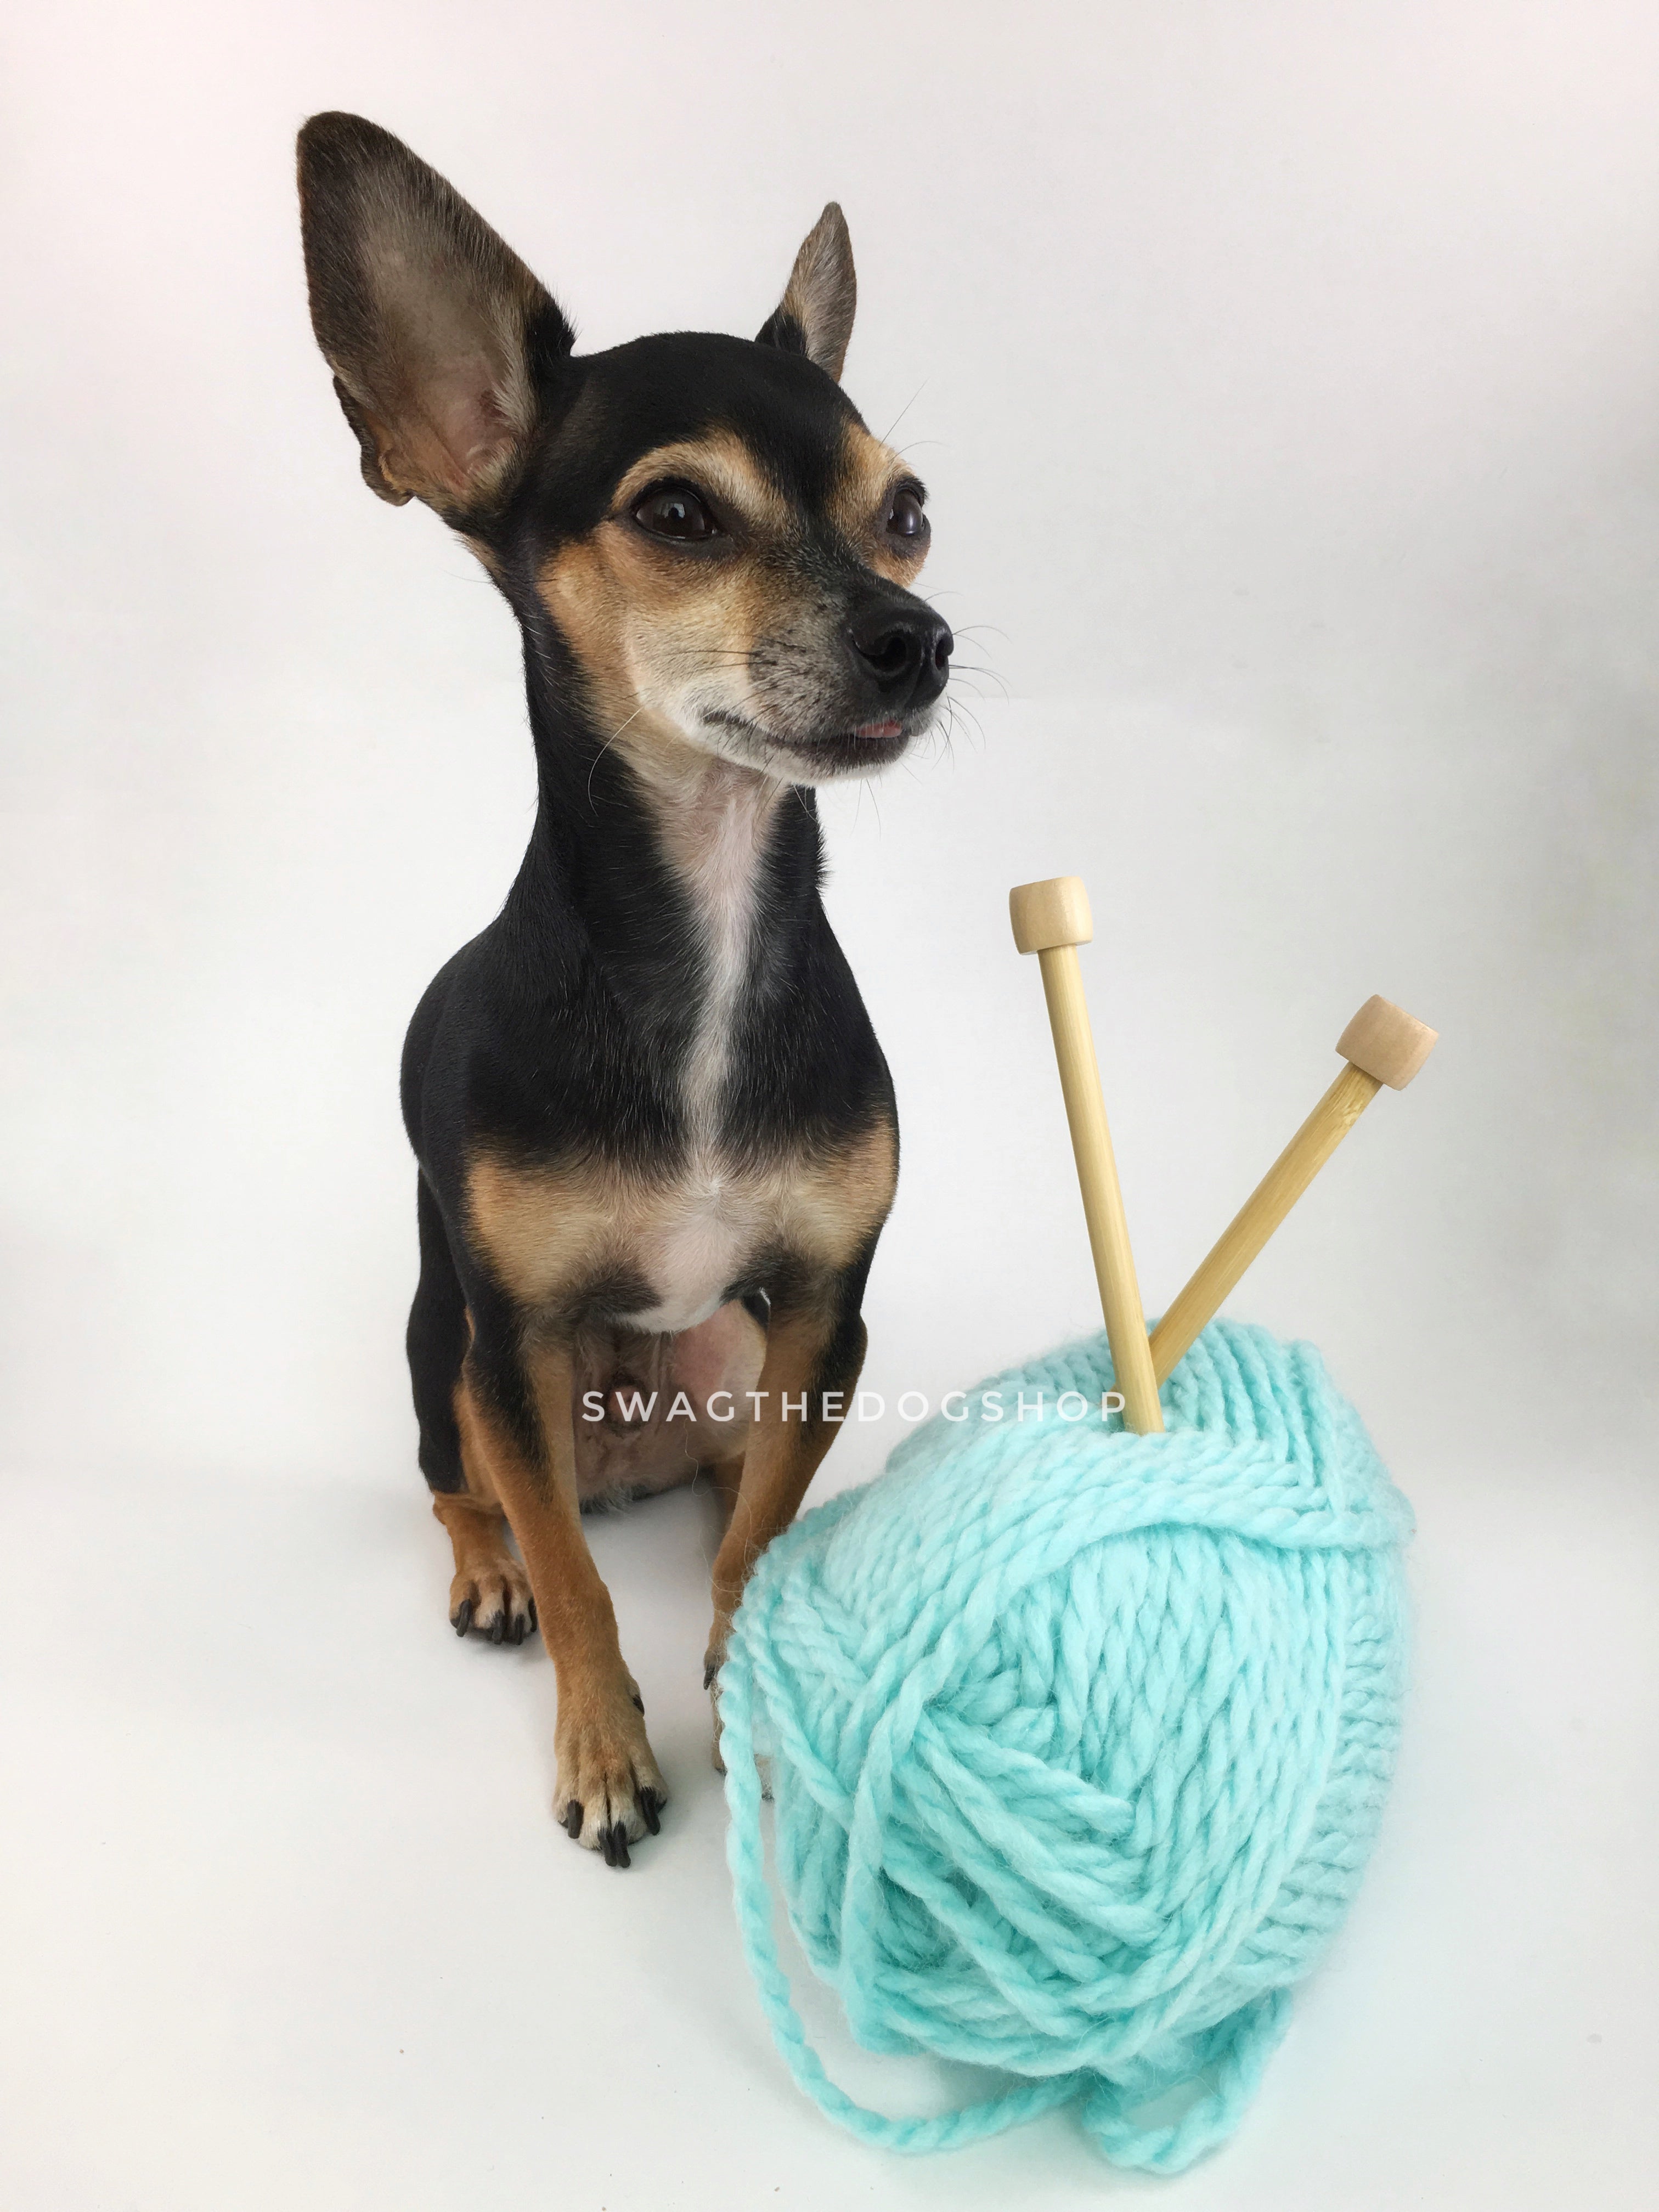 Turquoise Swagsnood - Yarn with Cute Chihuahua Dog. Turquoise Color Alpaca Yarn Dog Snood with Accent Button